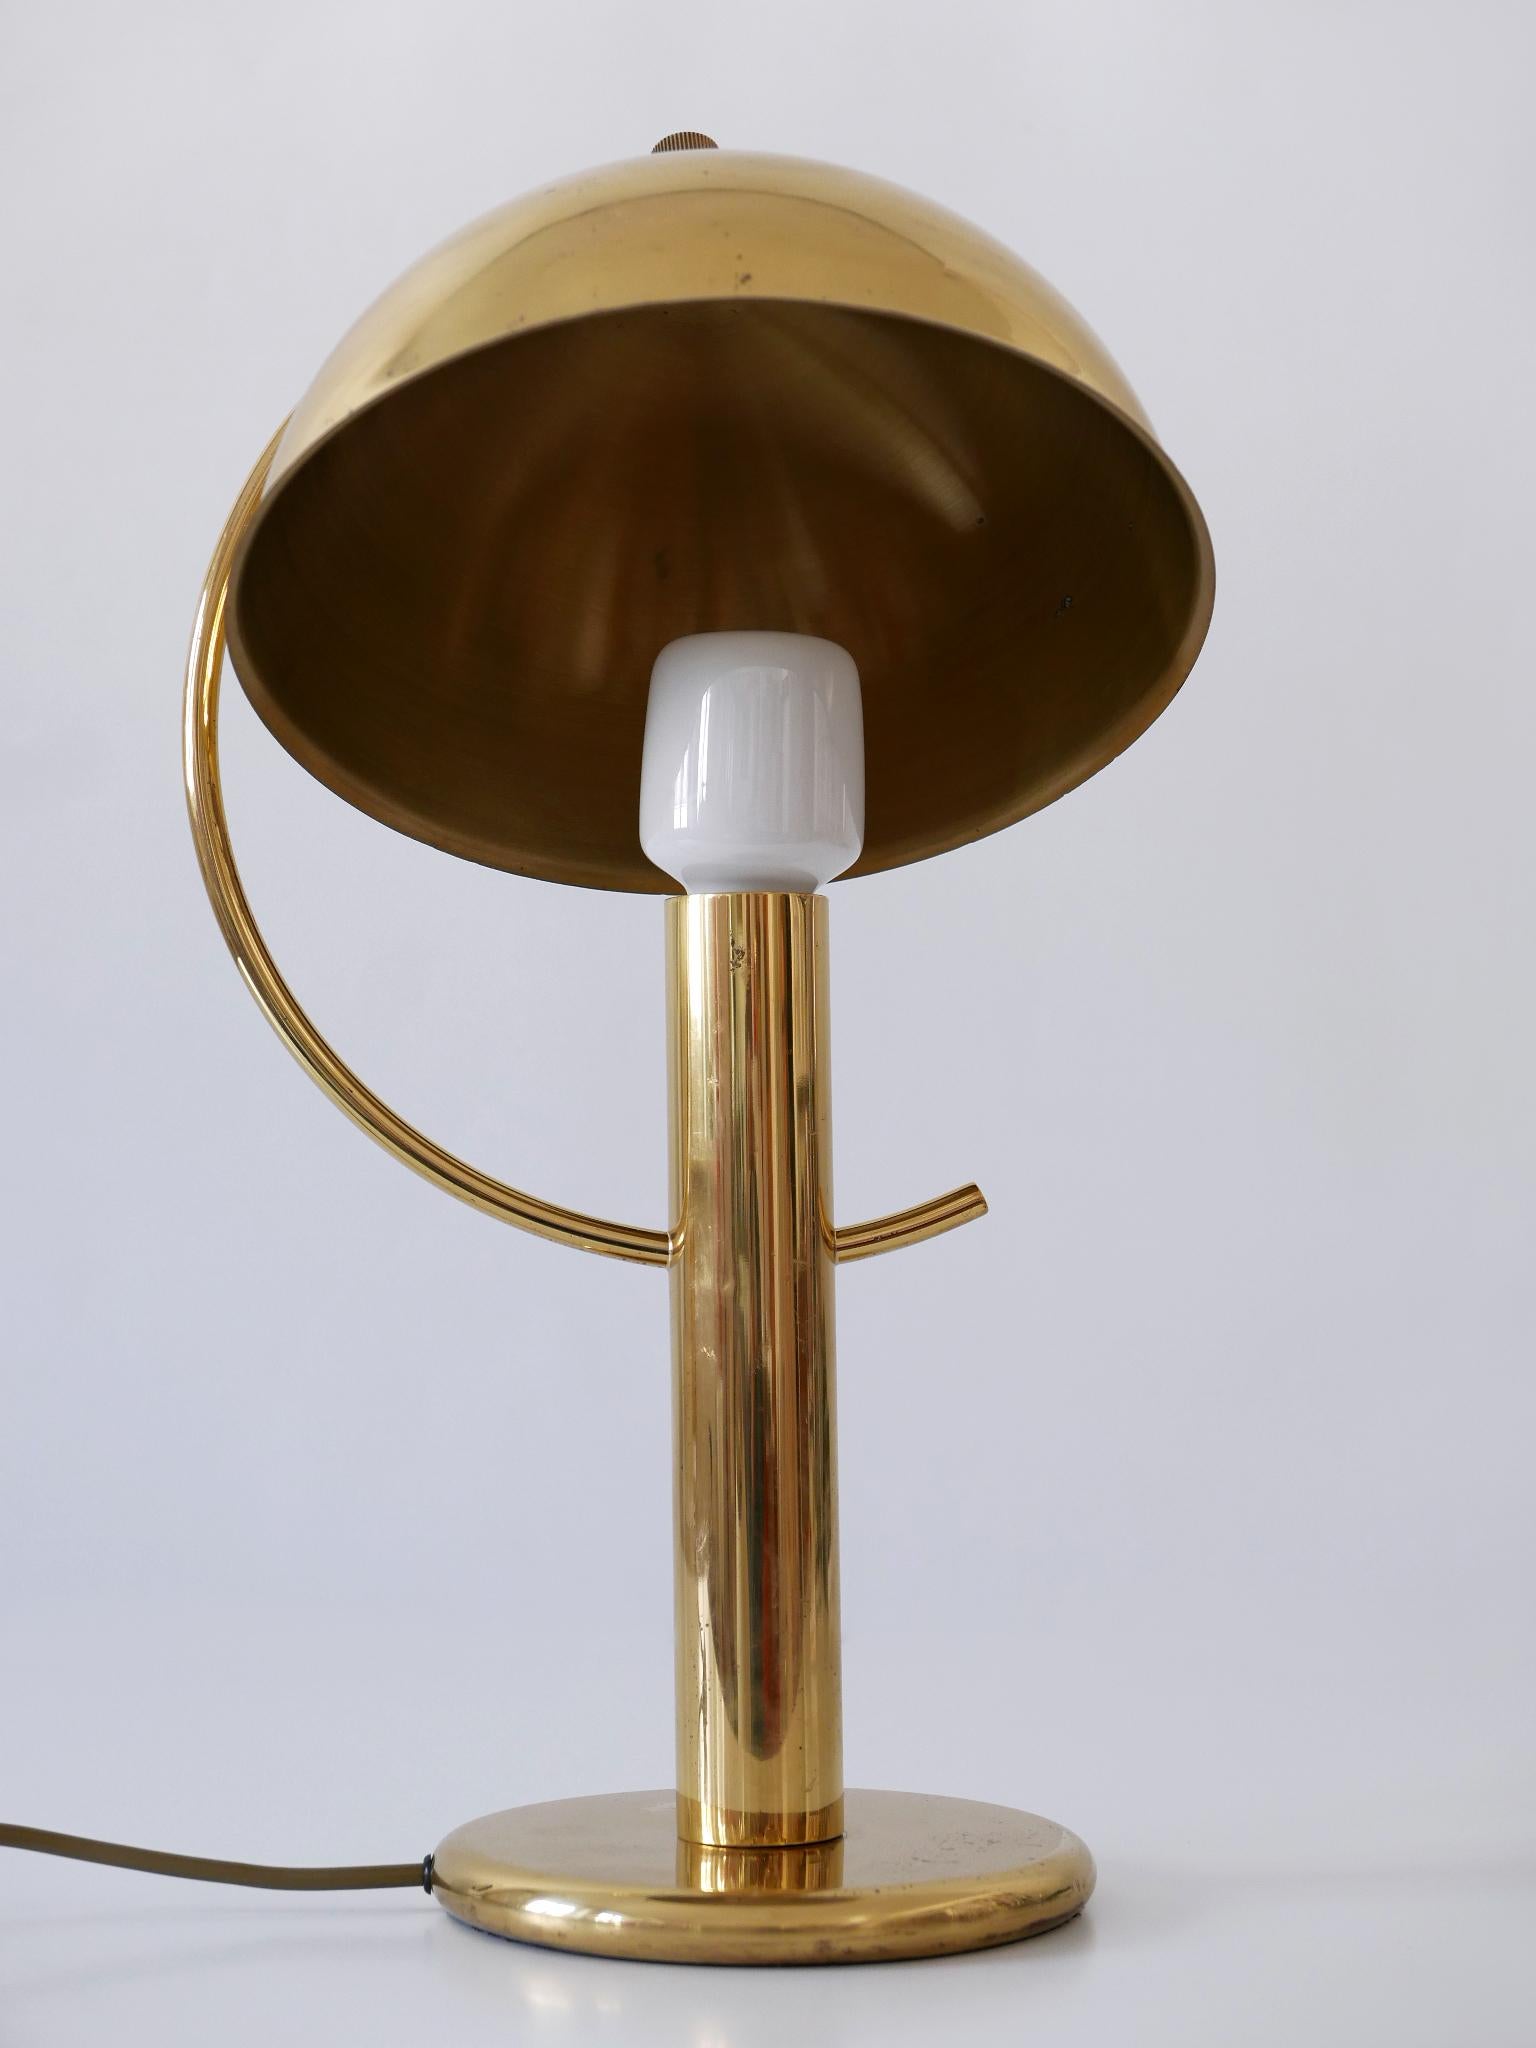 Exceptional Mid-Century Modern Brass Table Lamp by Gebrüder Cosack Germany 1960s For Sale 6